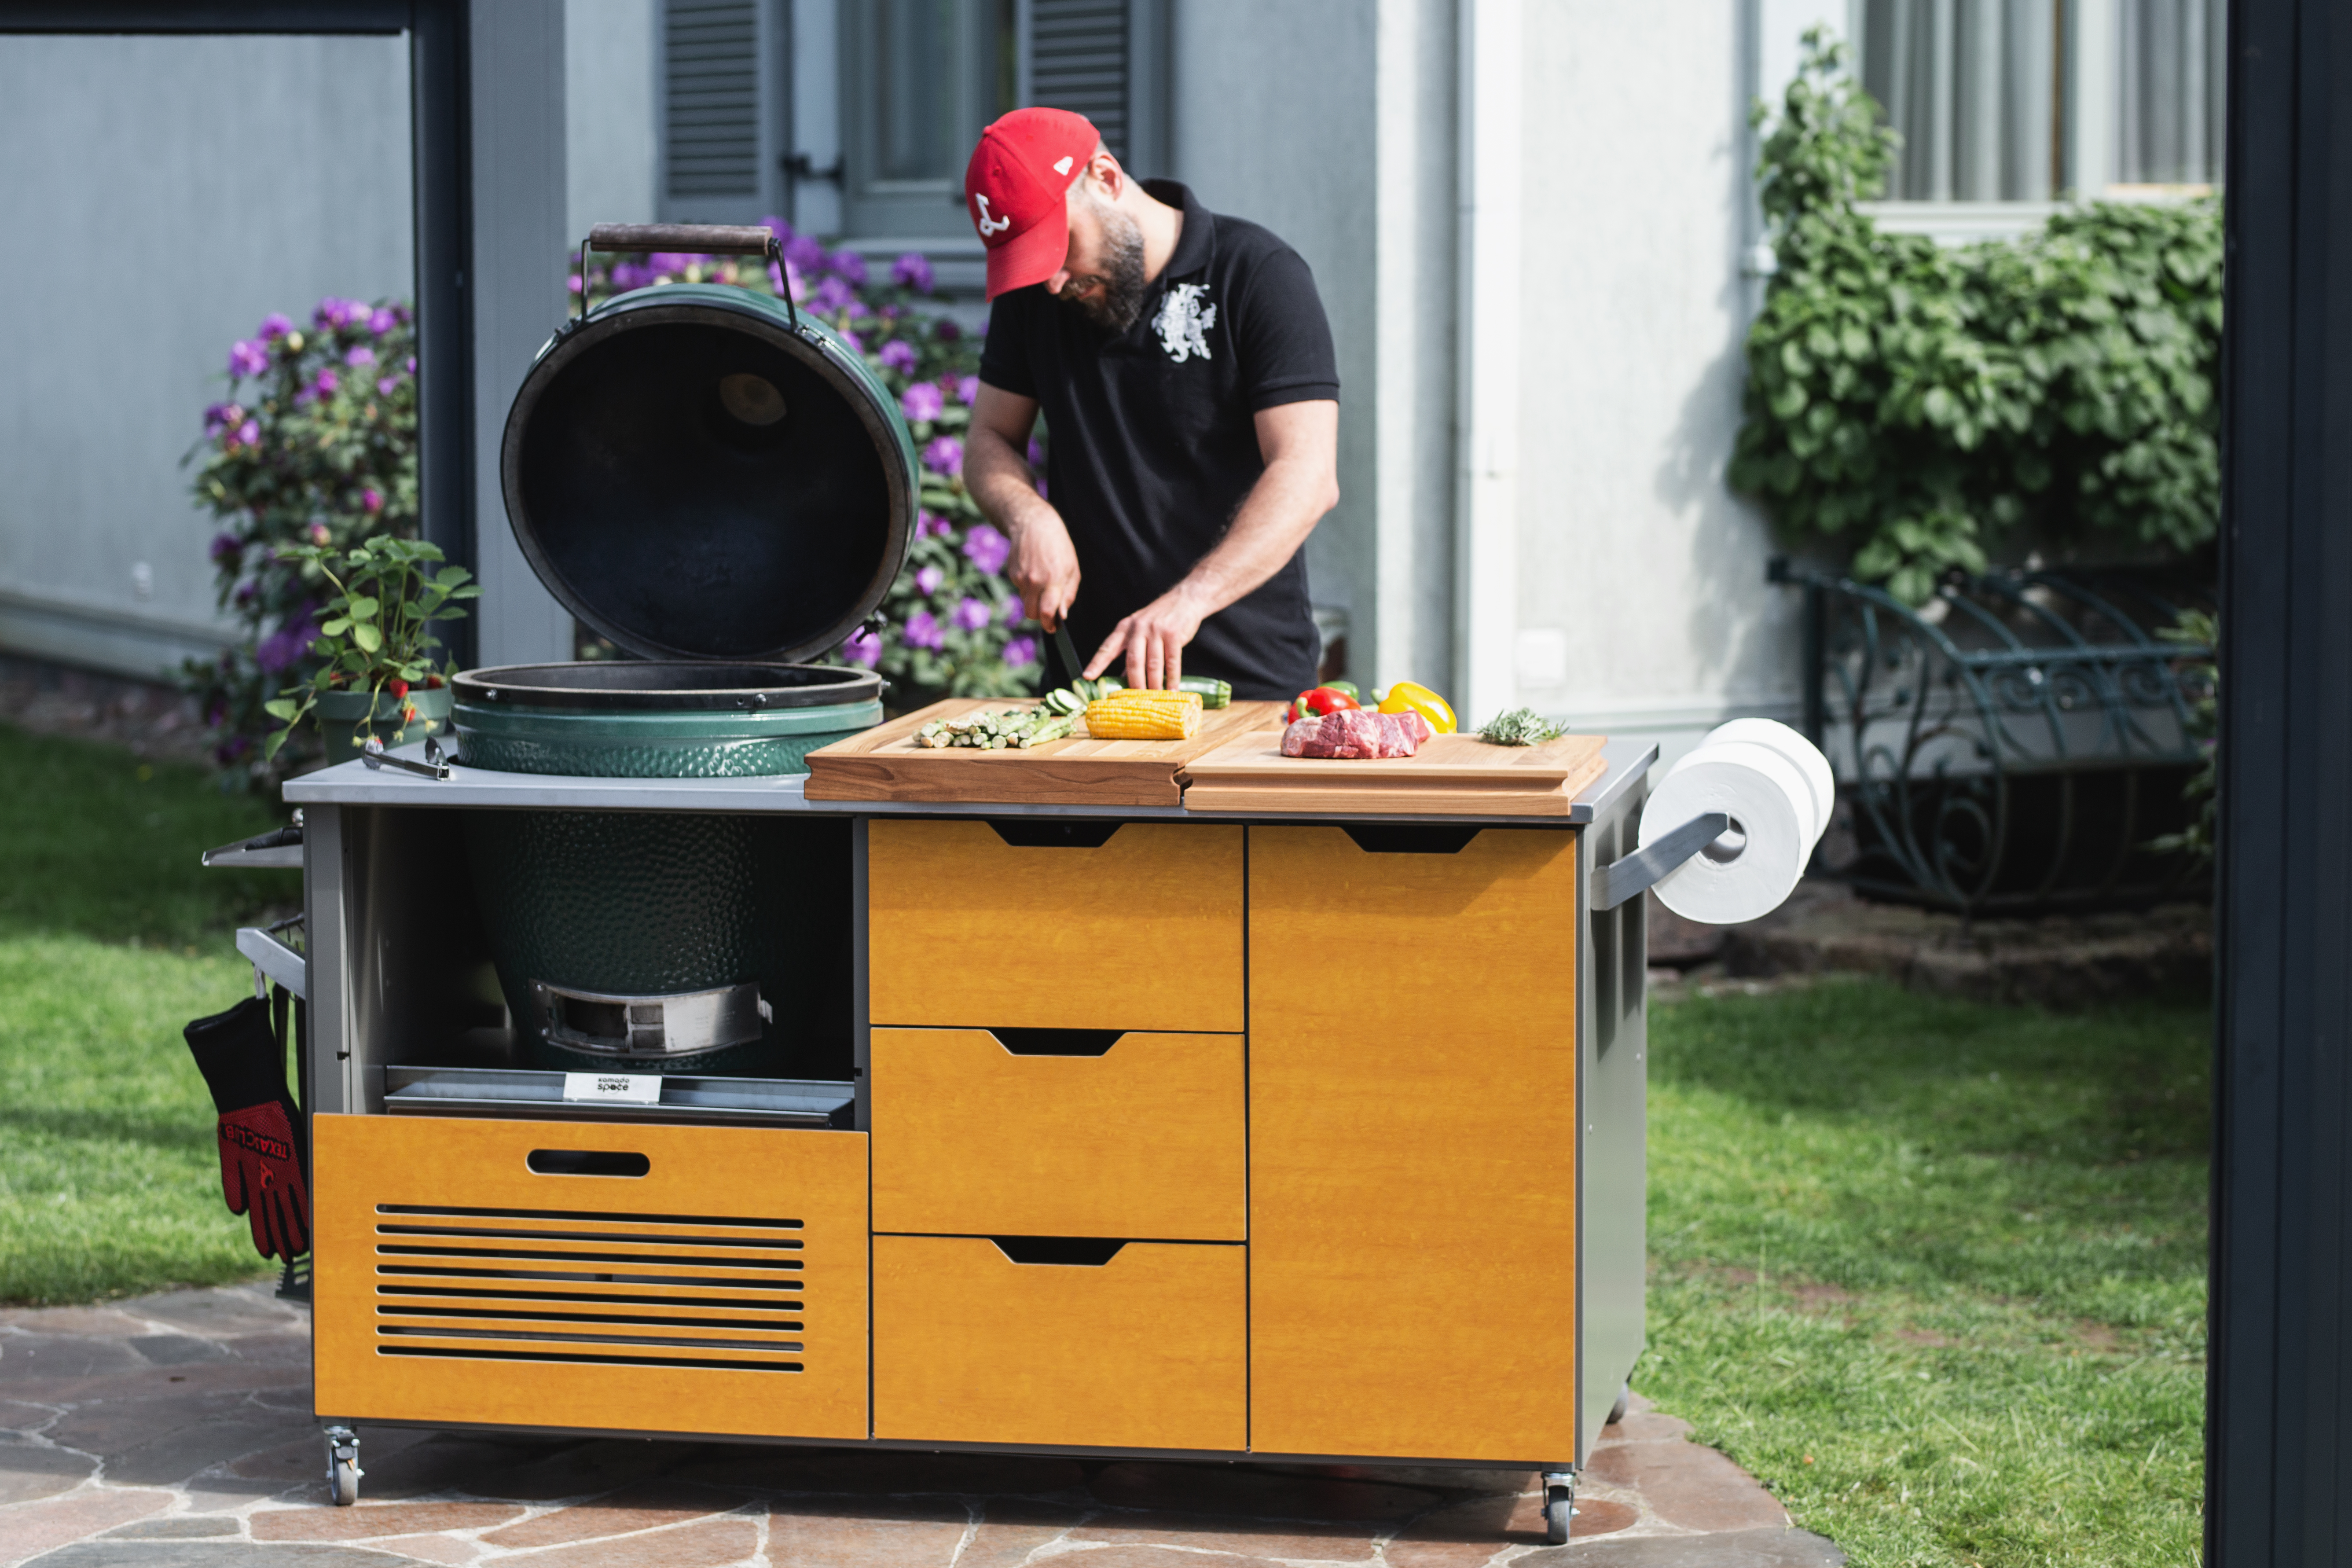 BBQ island maker KamadoSpace expands as lockdown fuels home cooking boom